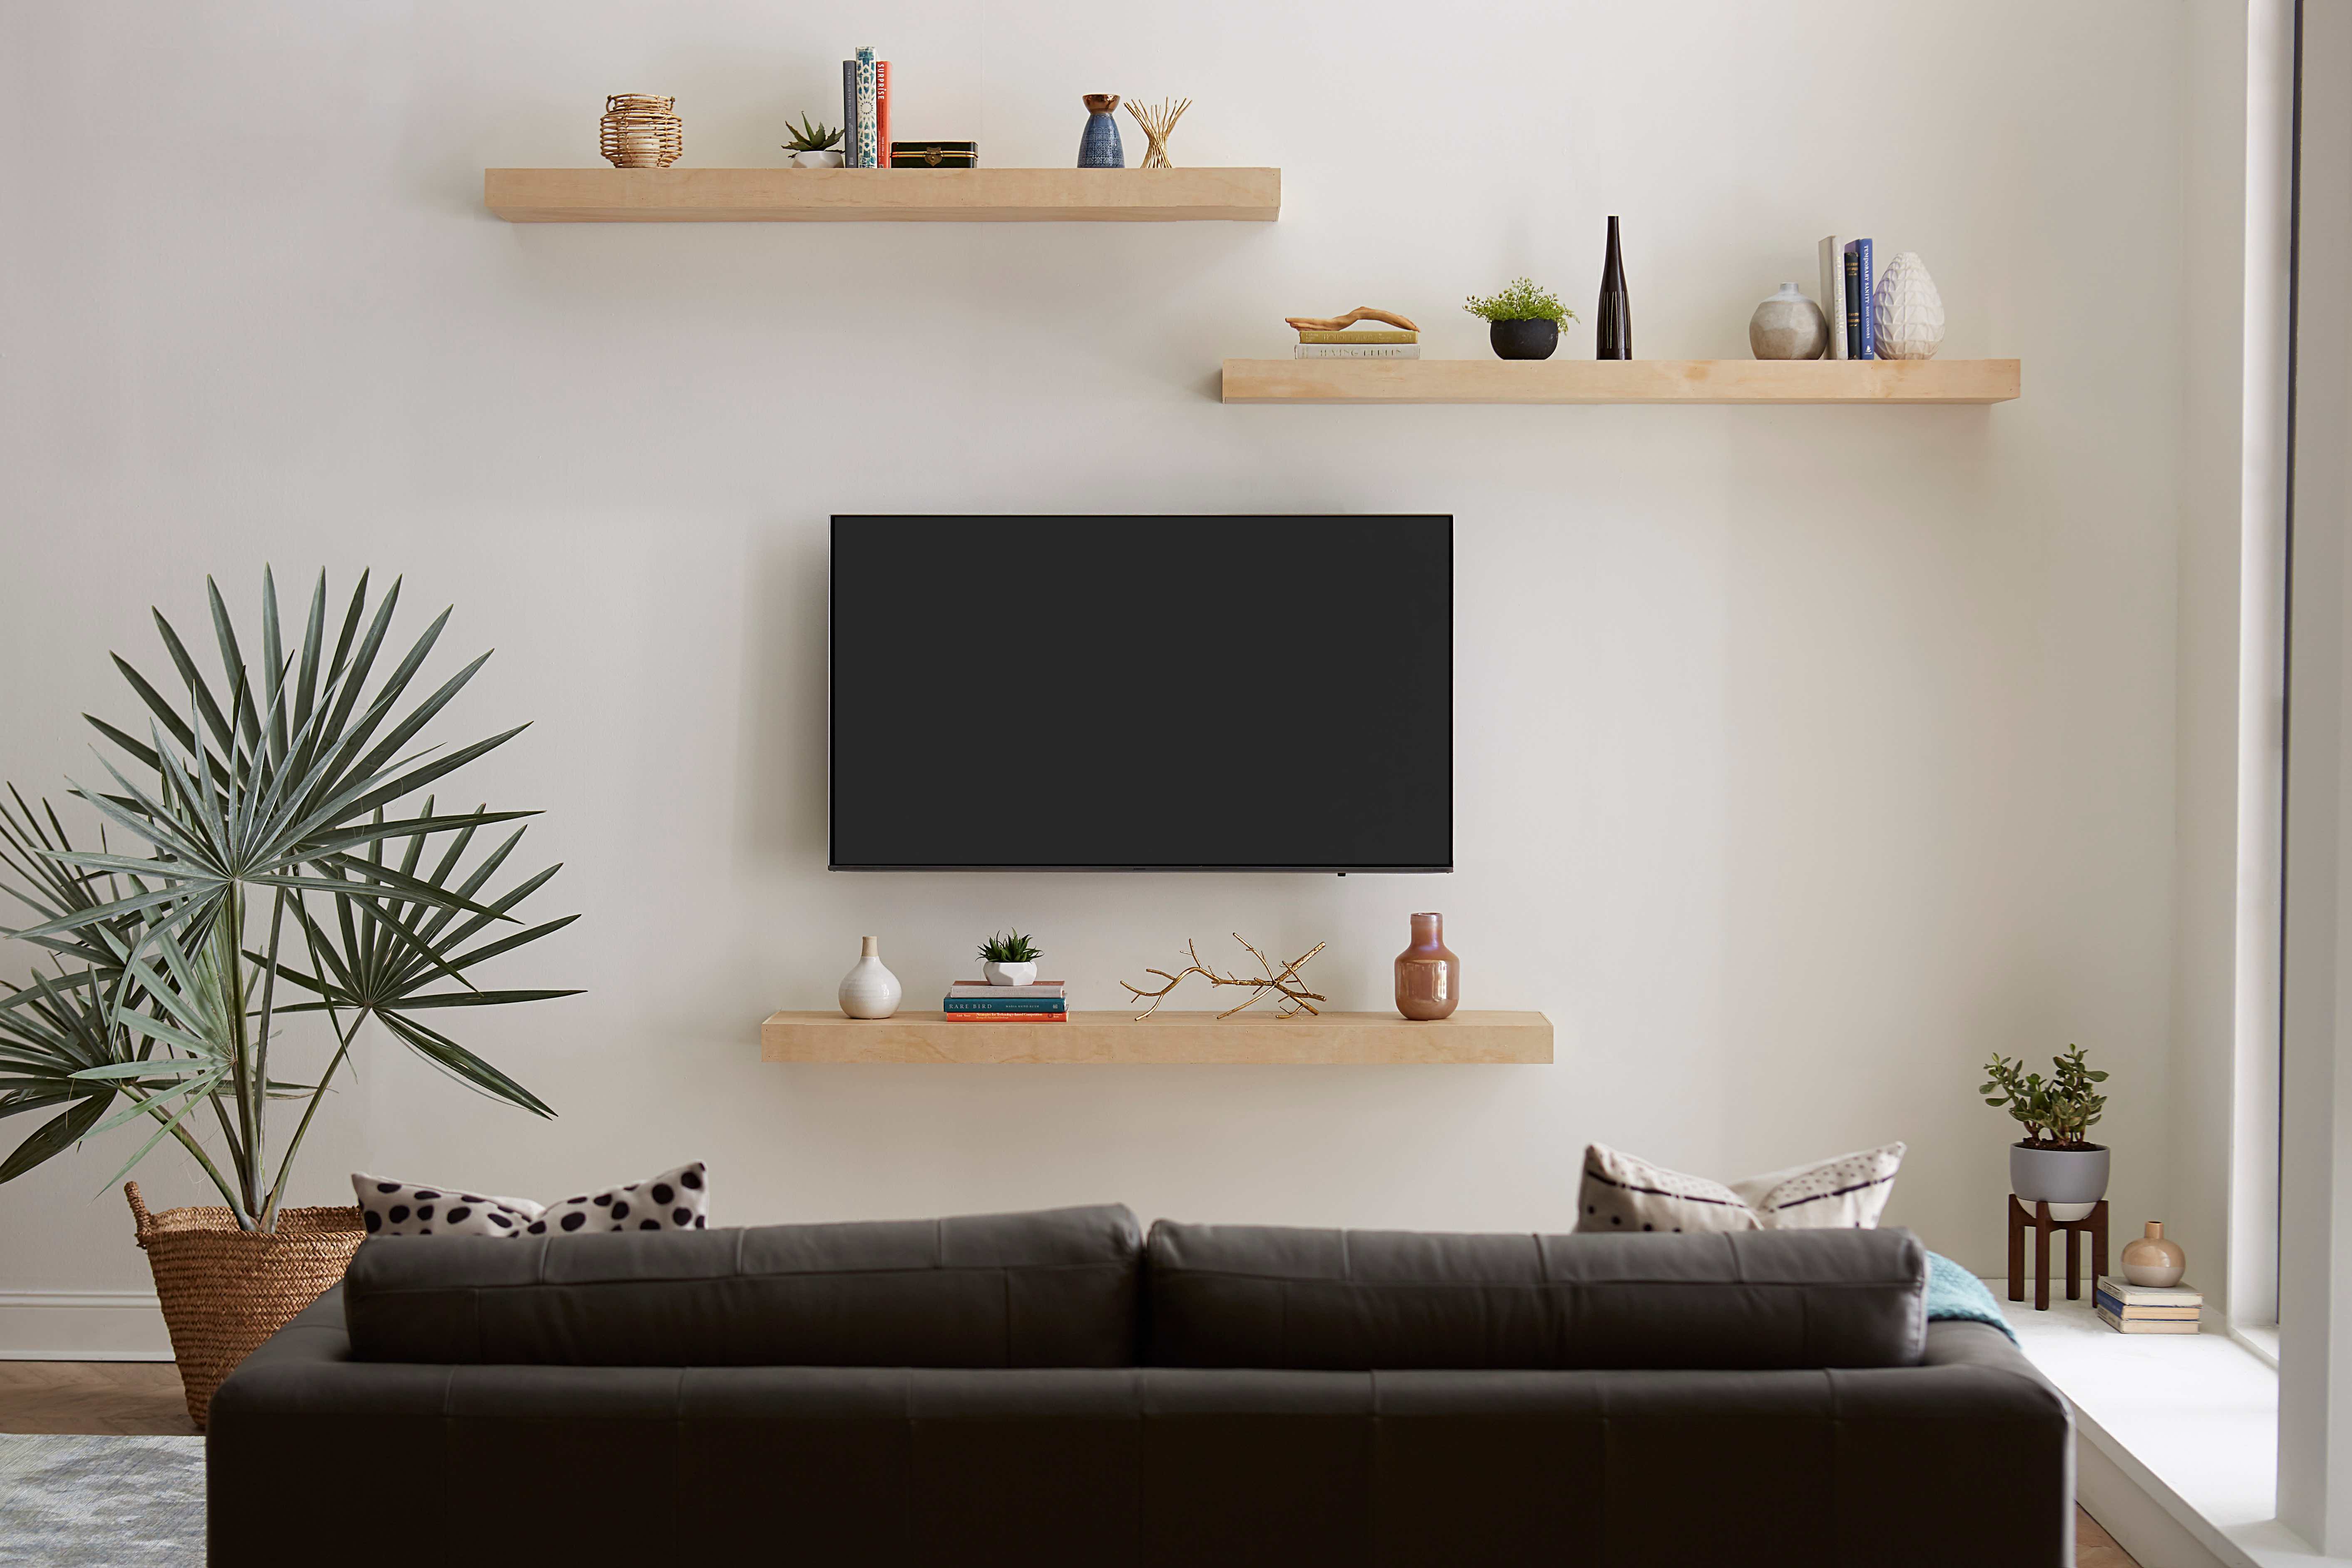 How to Decorate Floating Shelves Around TV